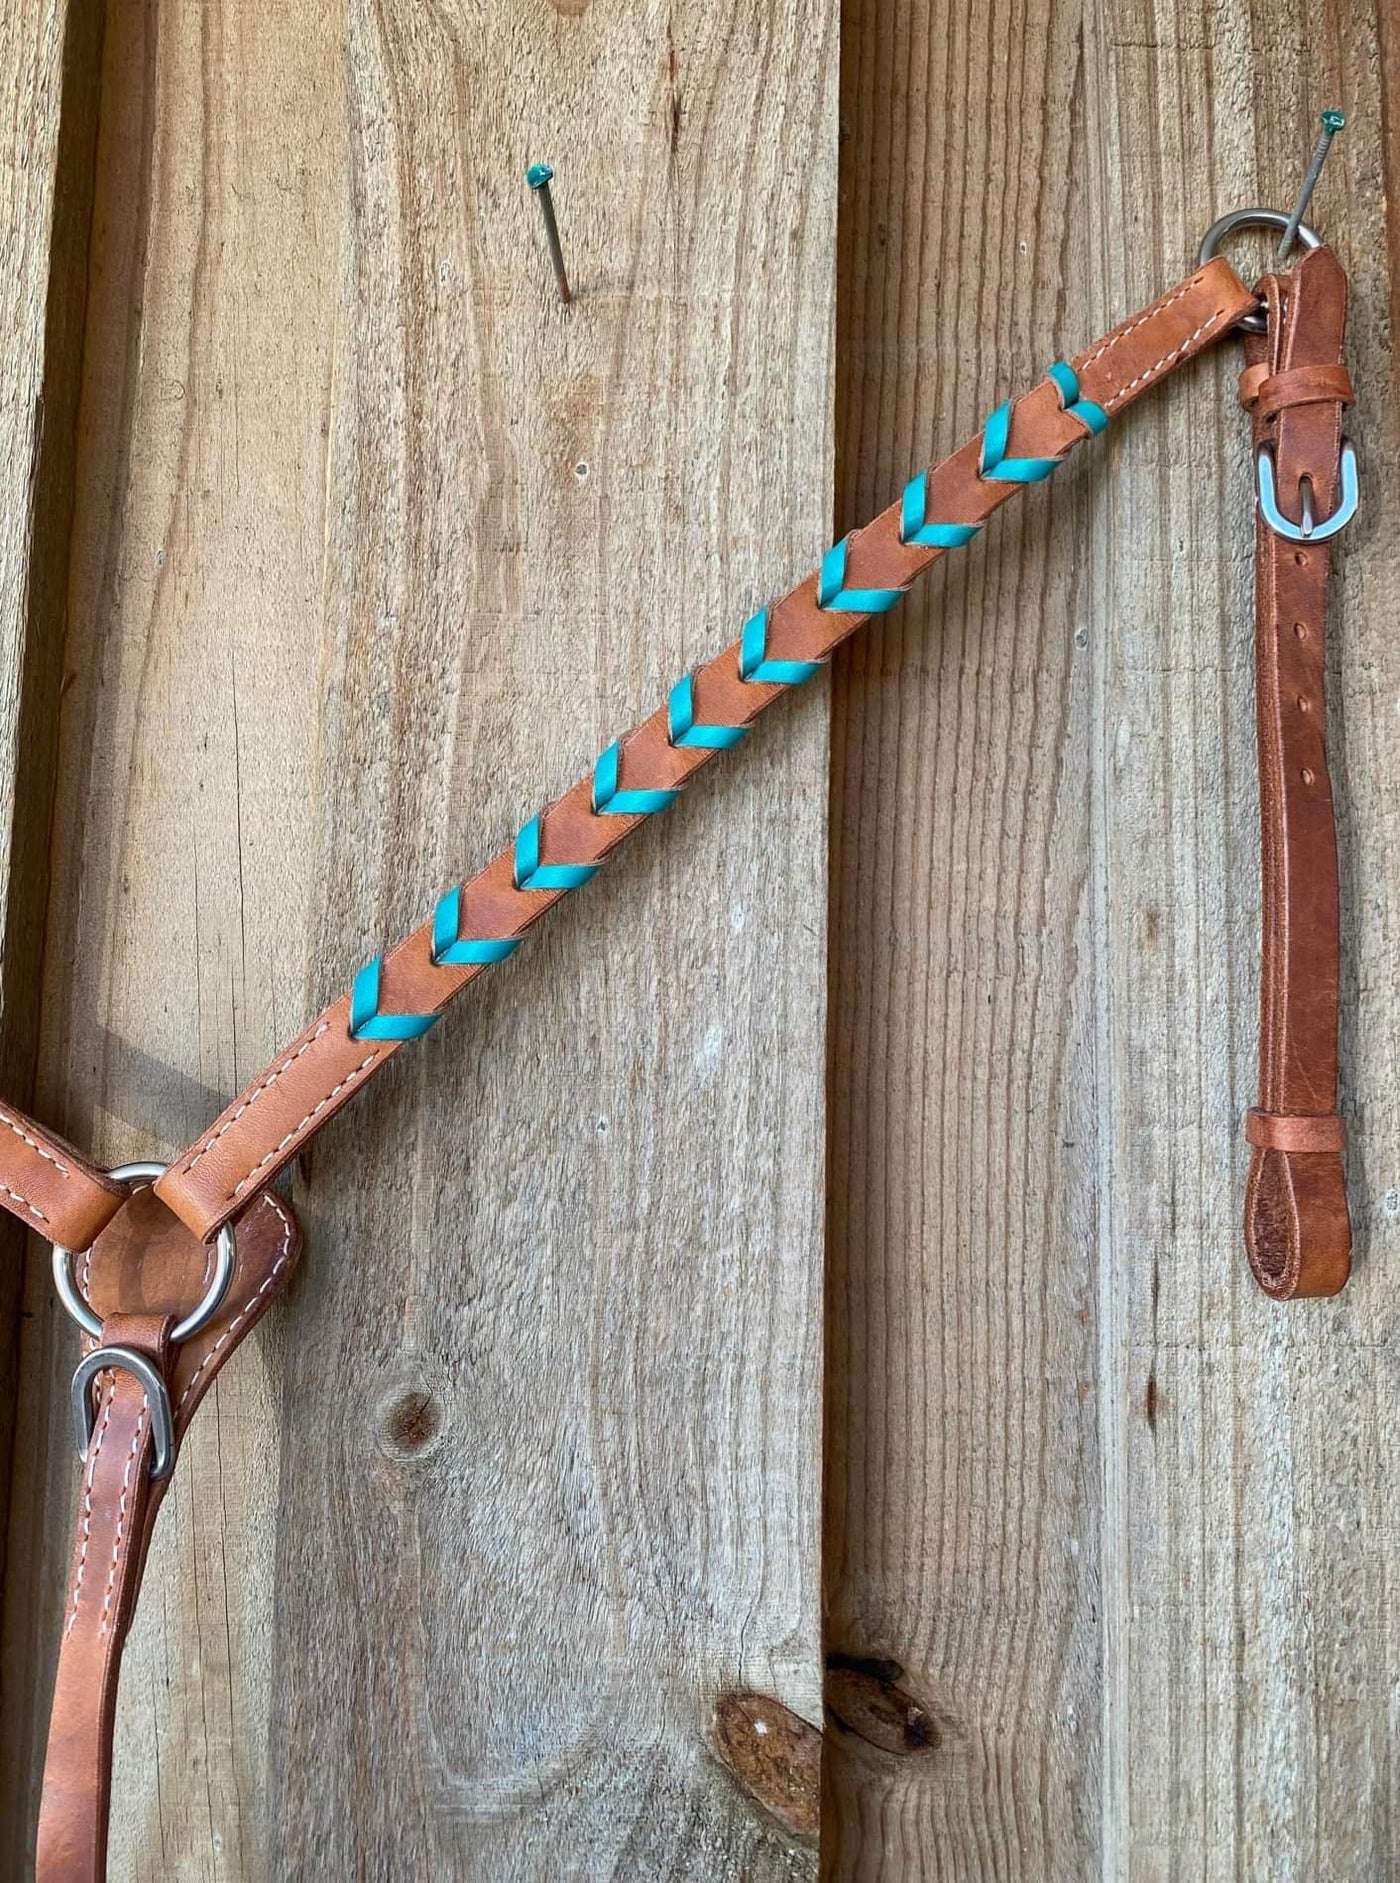 Western Tack Set - One Ear Bridle and Mathcing Turquoise Laced Breastplate